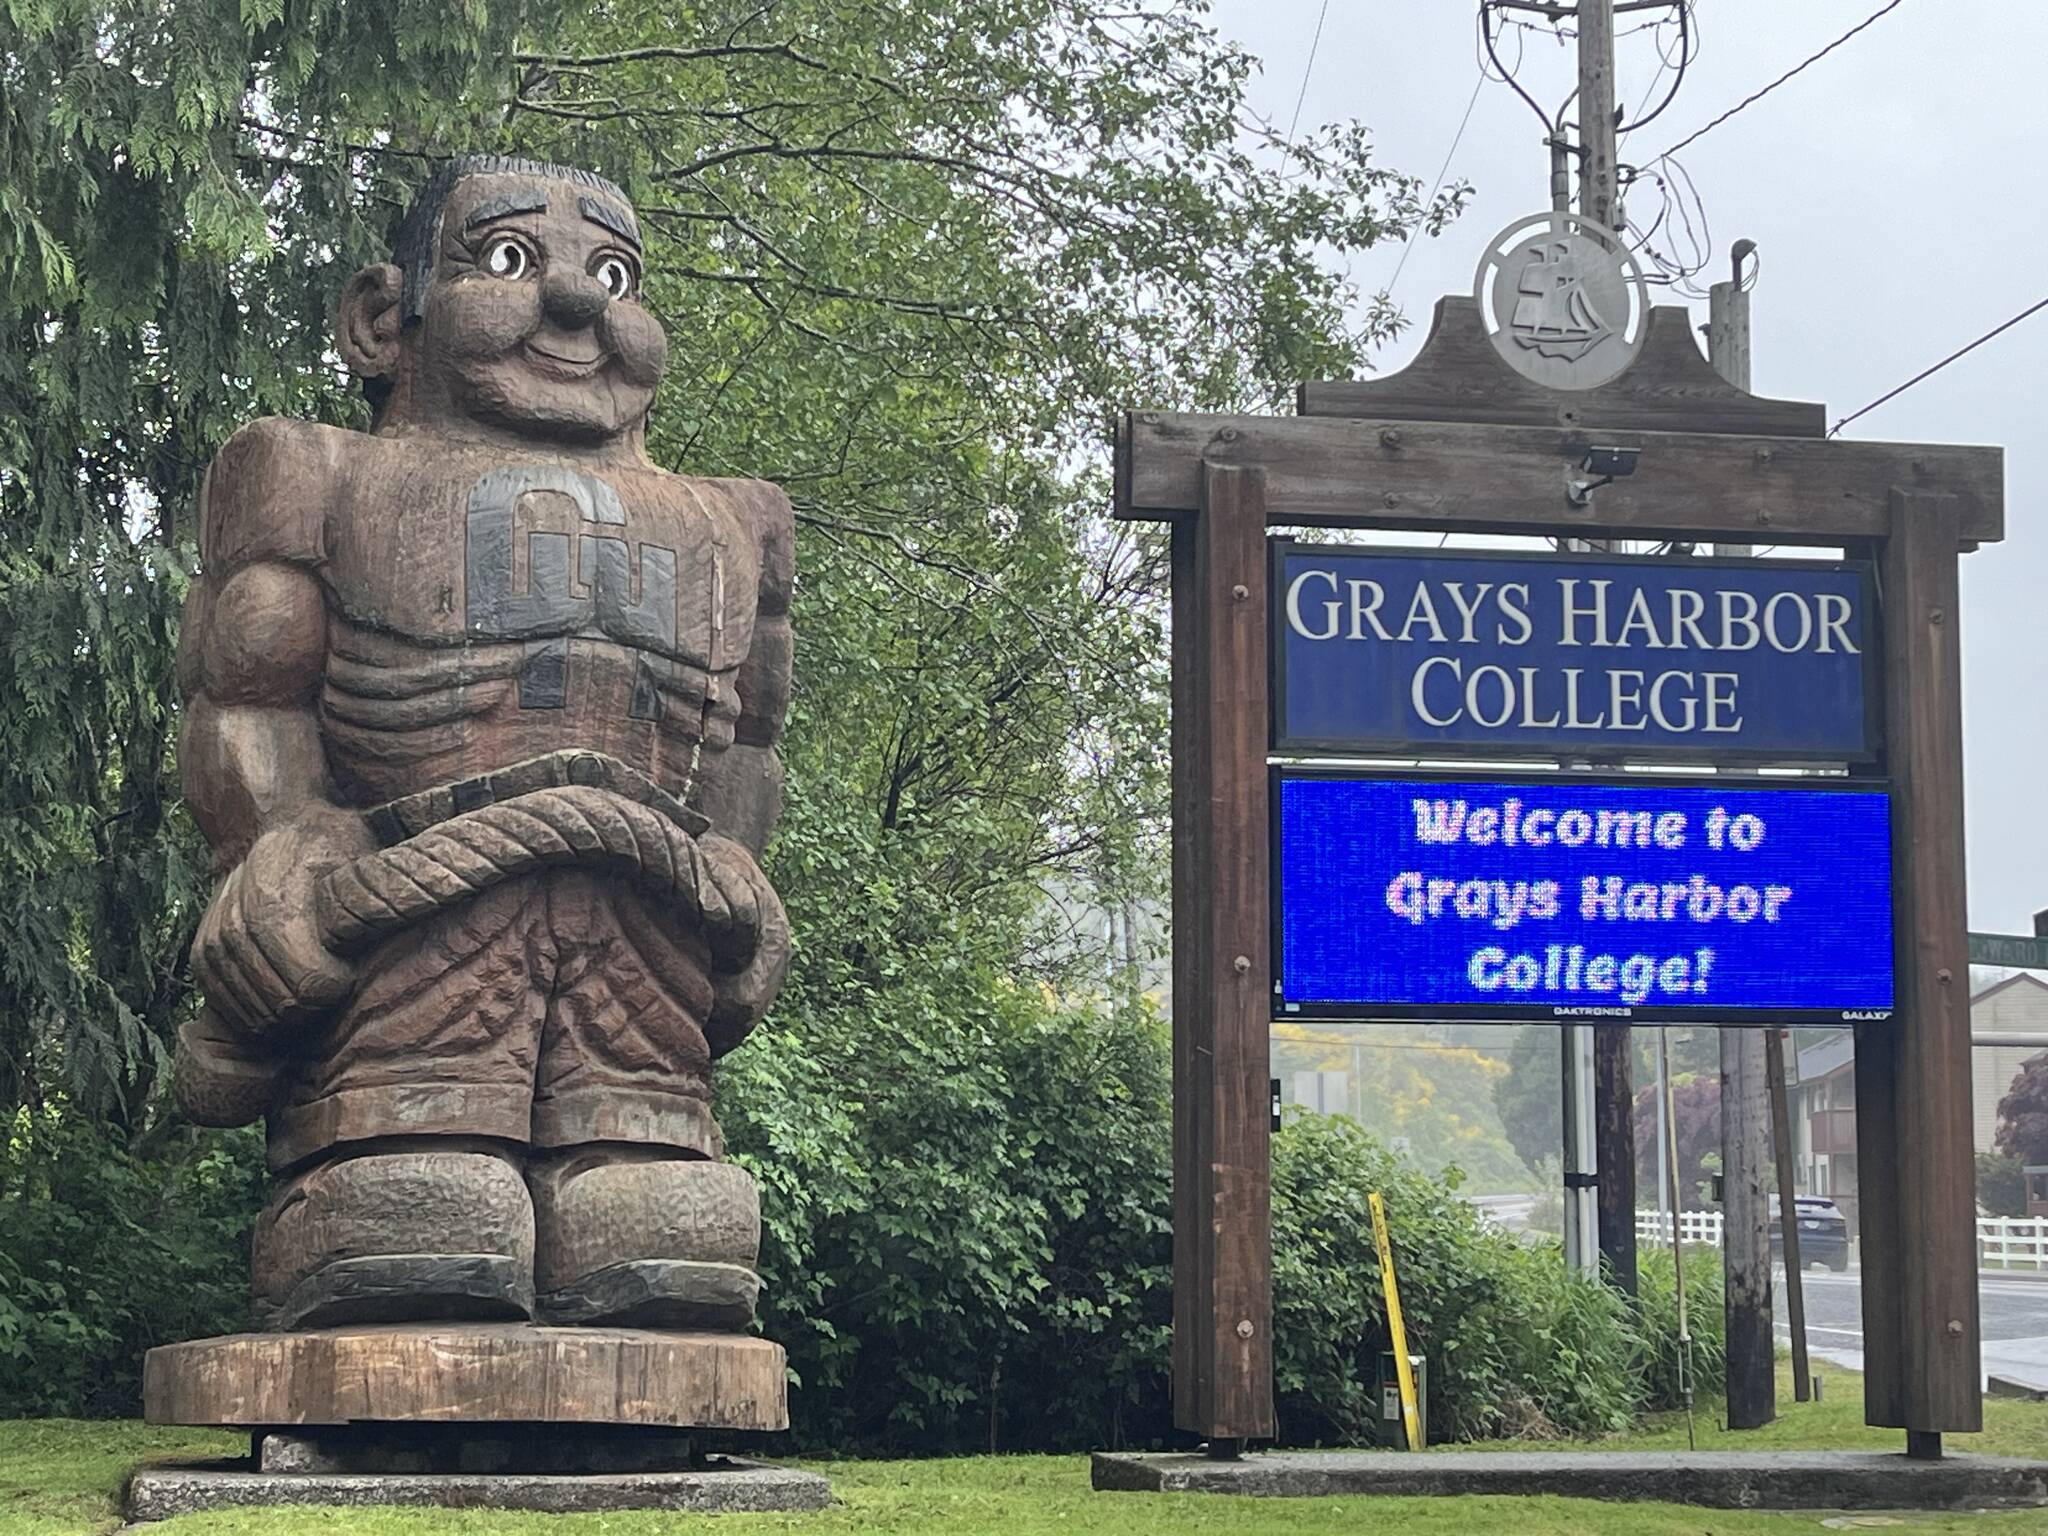 Matthew N. Wells / The Daily World
Charlie Choker, Grays Harbor College’s (GHC) wooden mascot who stands at the entrance of GHC, will help host Aberdeen City Council meetings in what the city hopes is a “temporary permanent” set up until the elevator in Aberdeen City Hall is replaced.